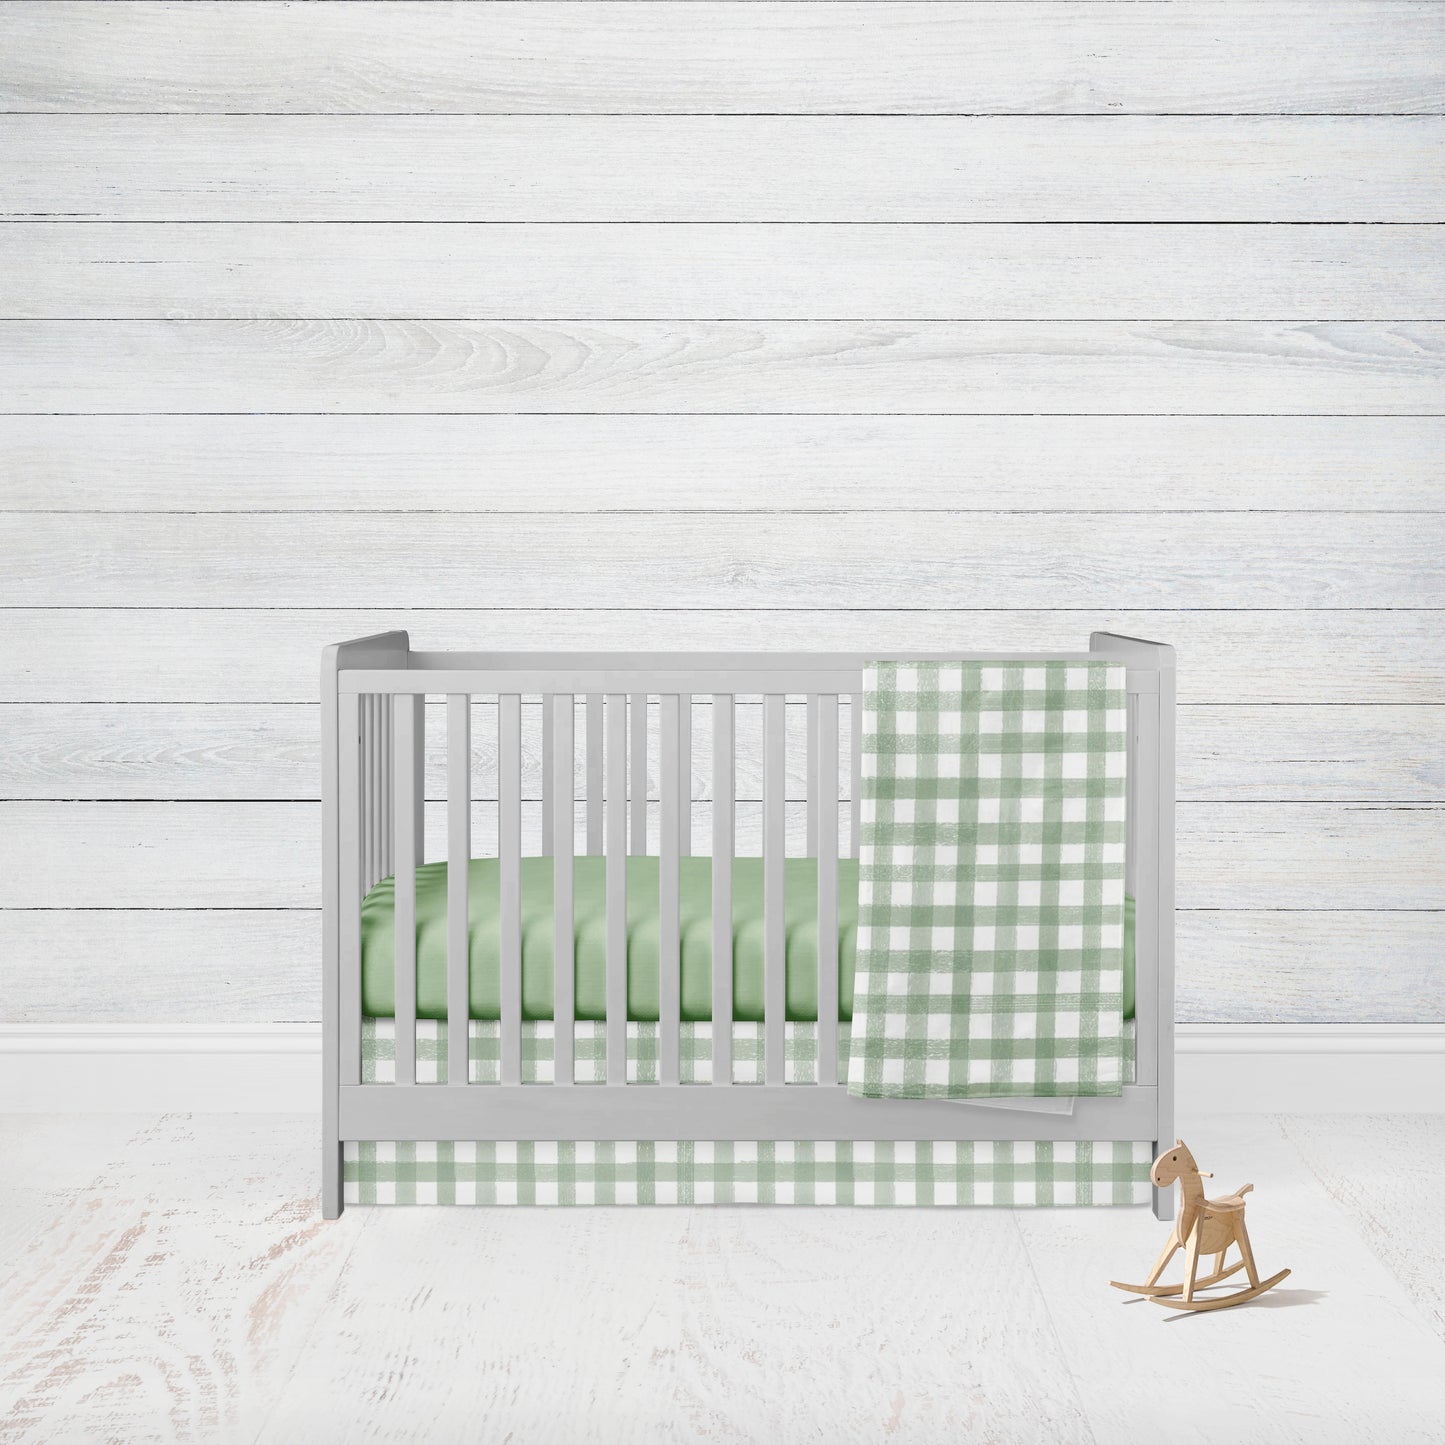 sage gingham check crib bedding set, shown in the 3-piece set with sheet, crib skirt & blanket or comforter